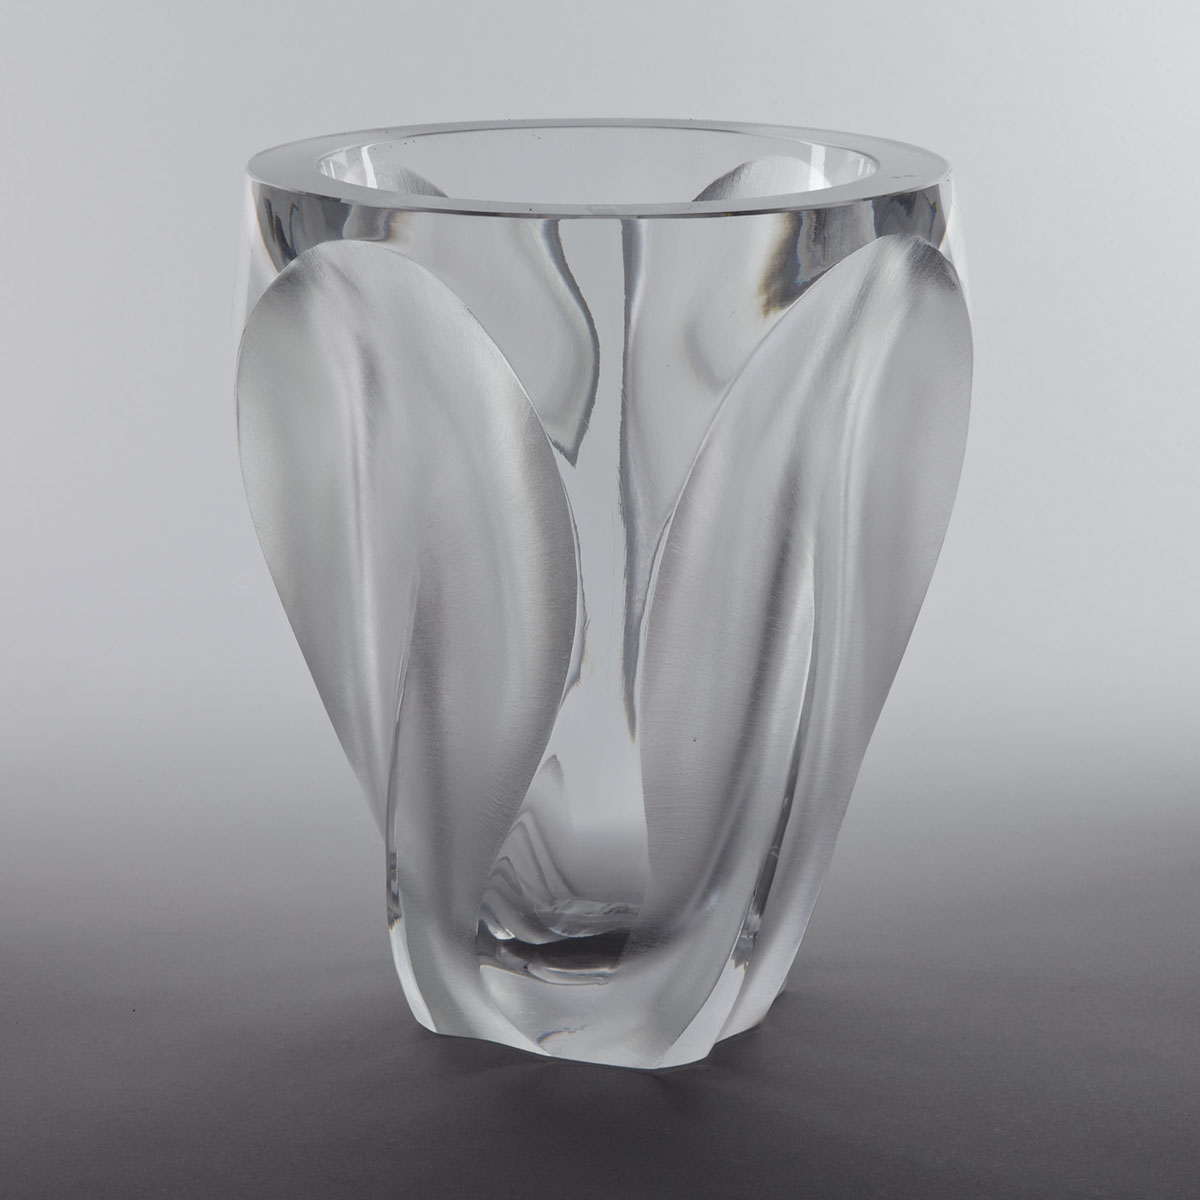 ‘Ingrid’, Lalique Moulded and Partly Frosted Glass Vase, post-1945